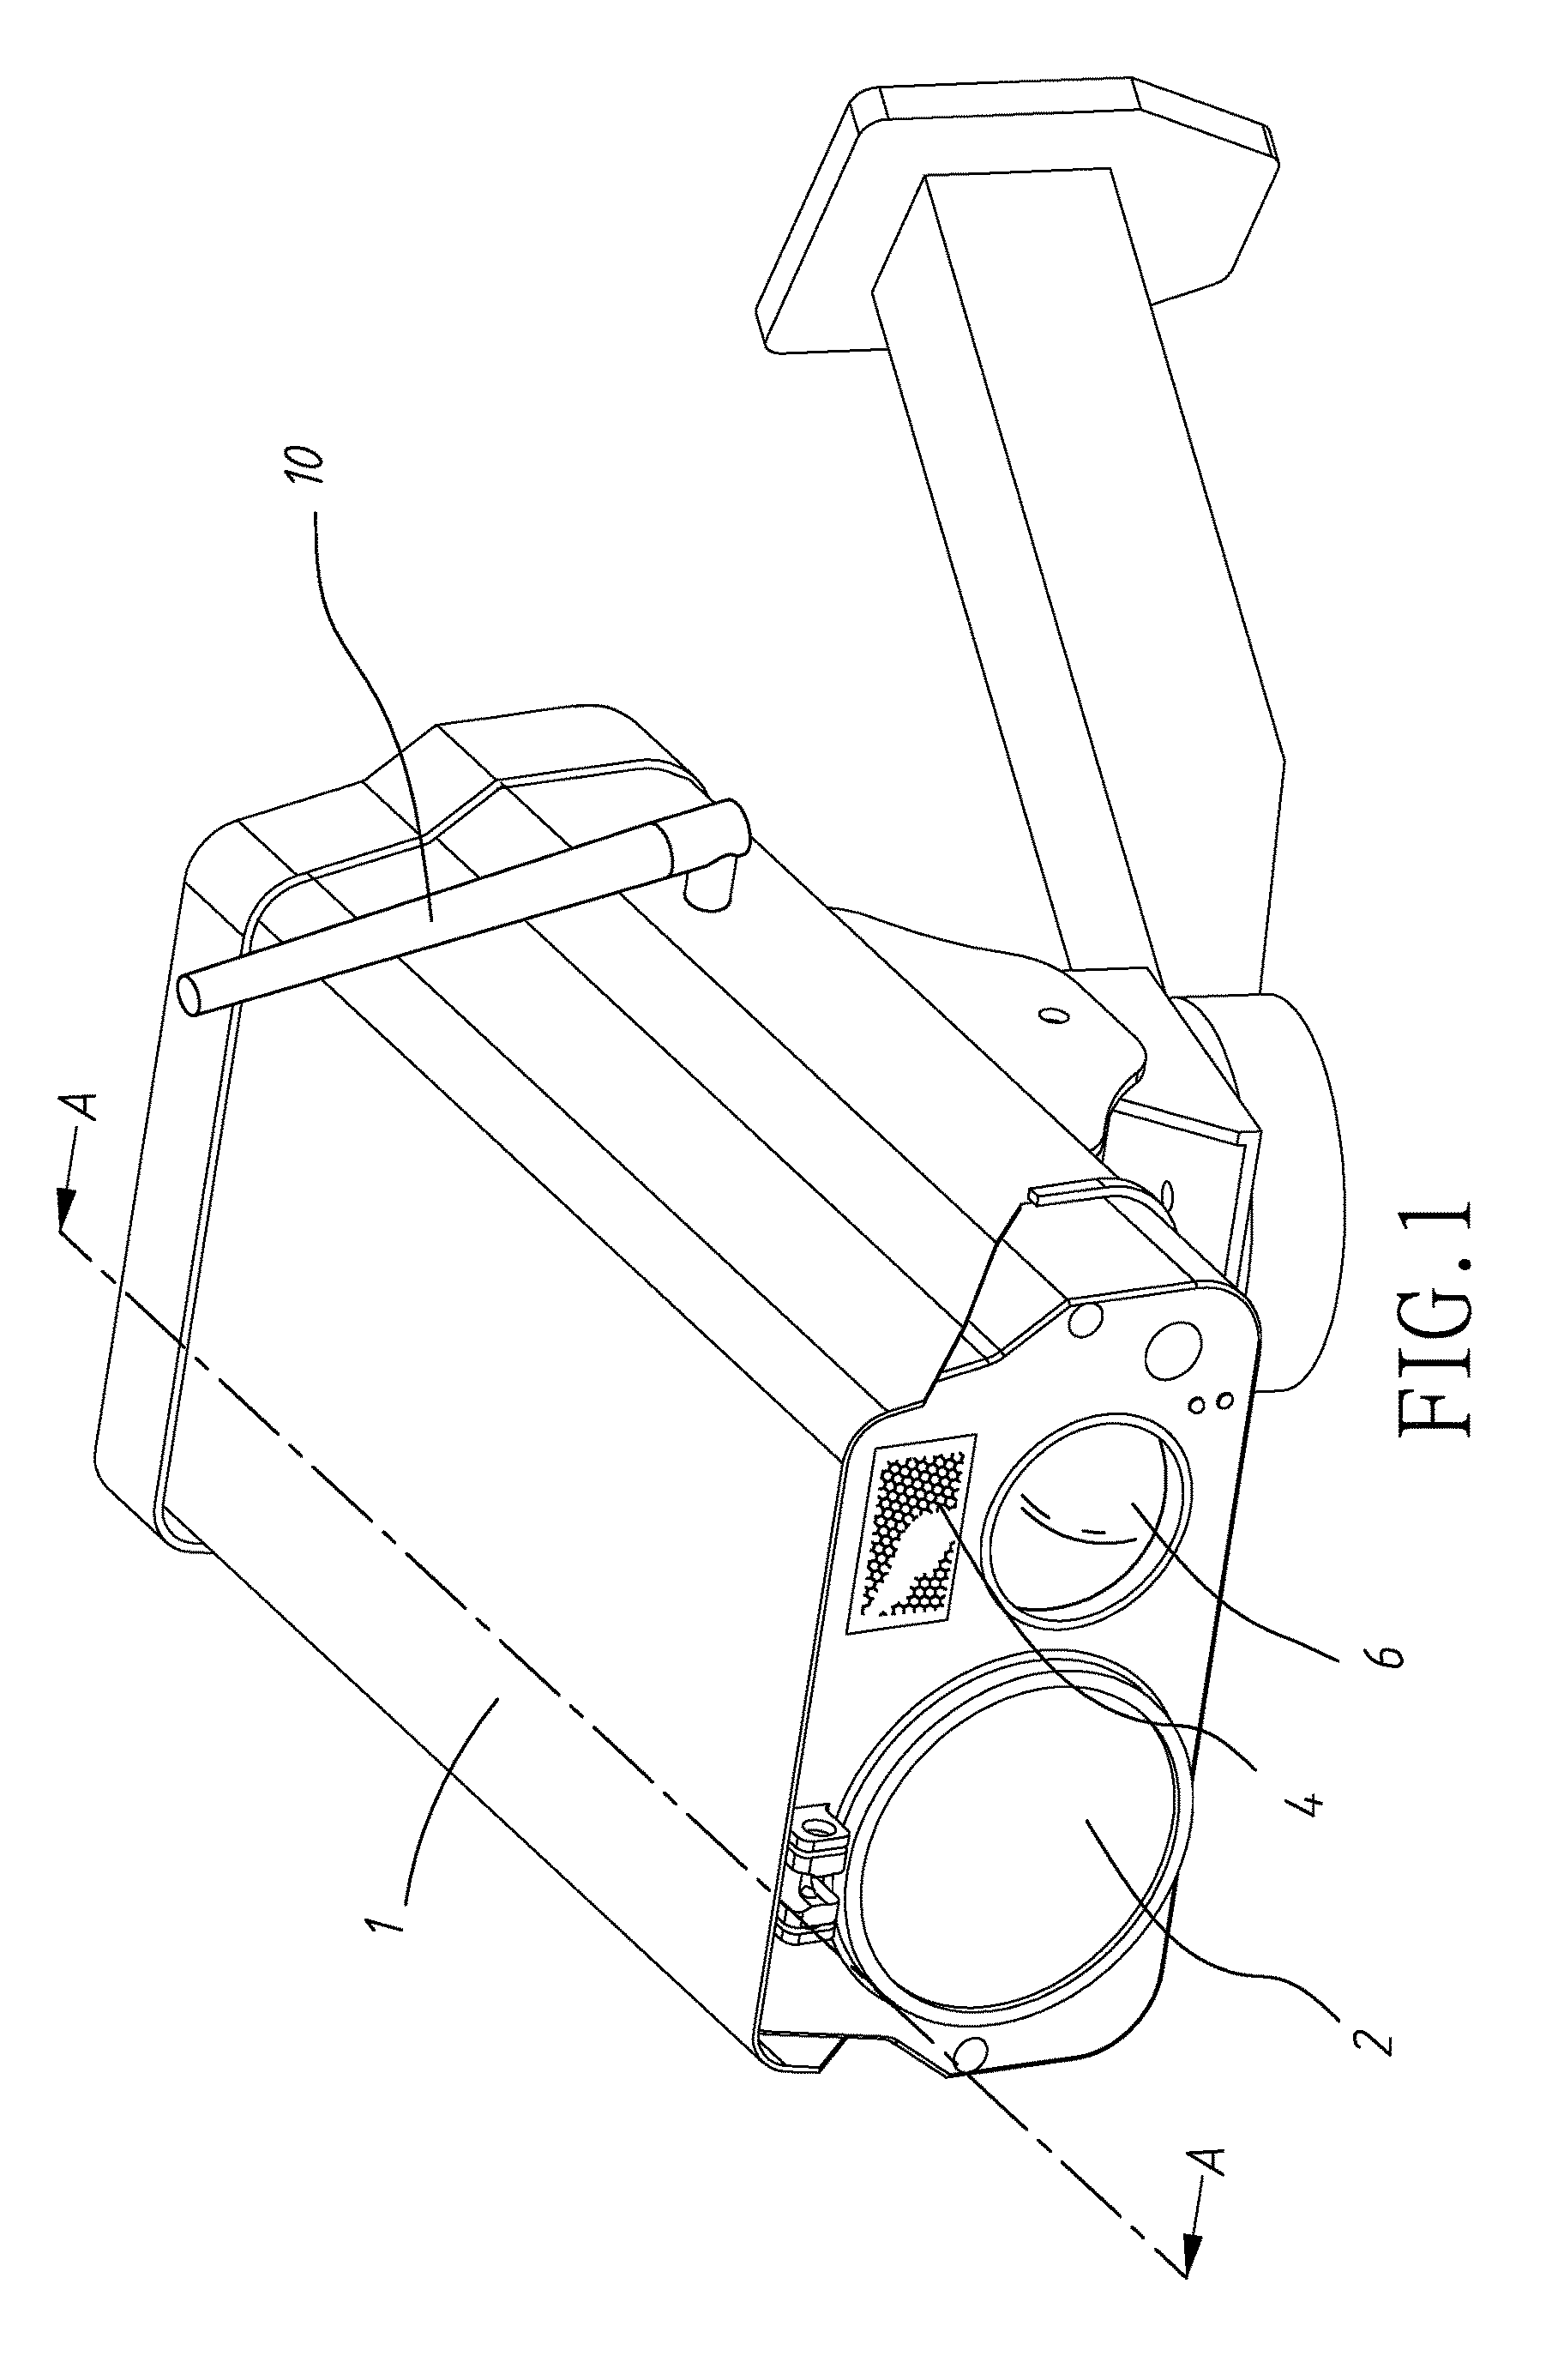 Concealed net throwing device